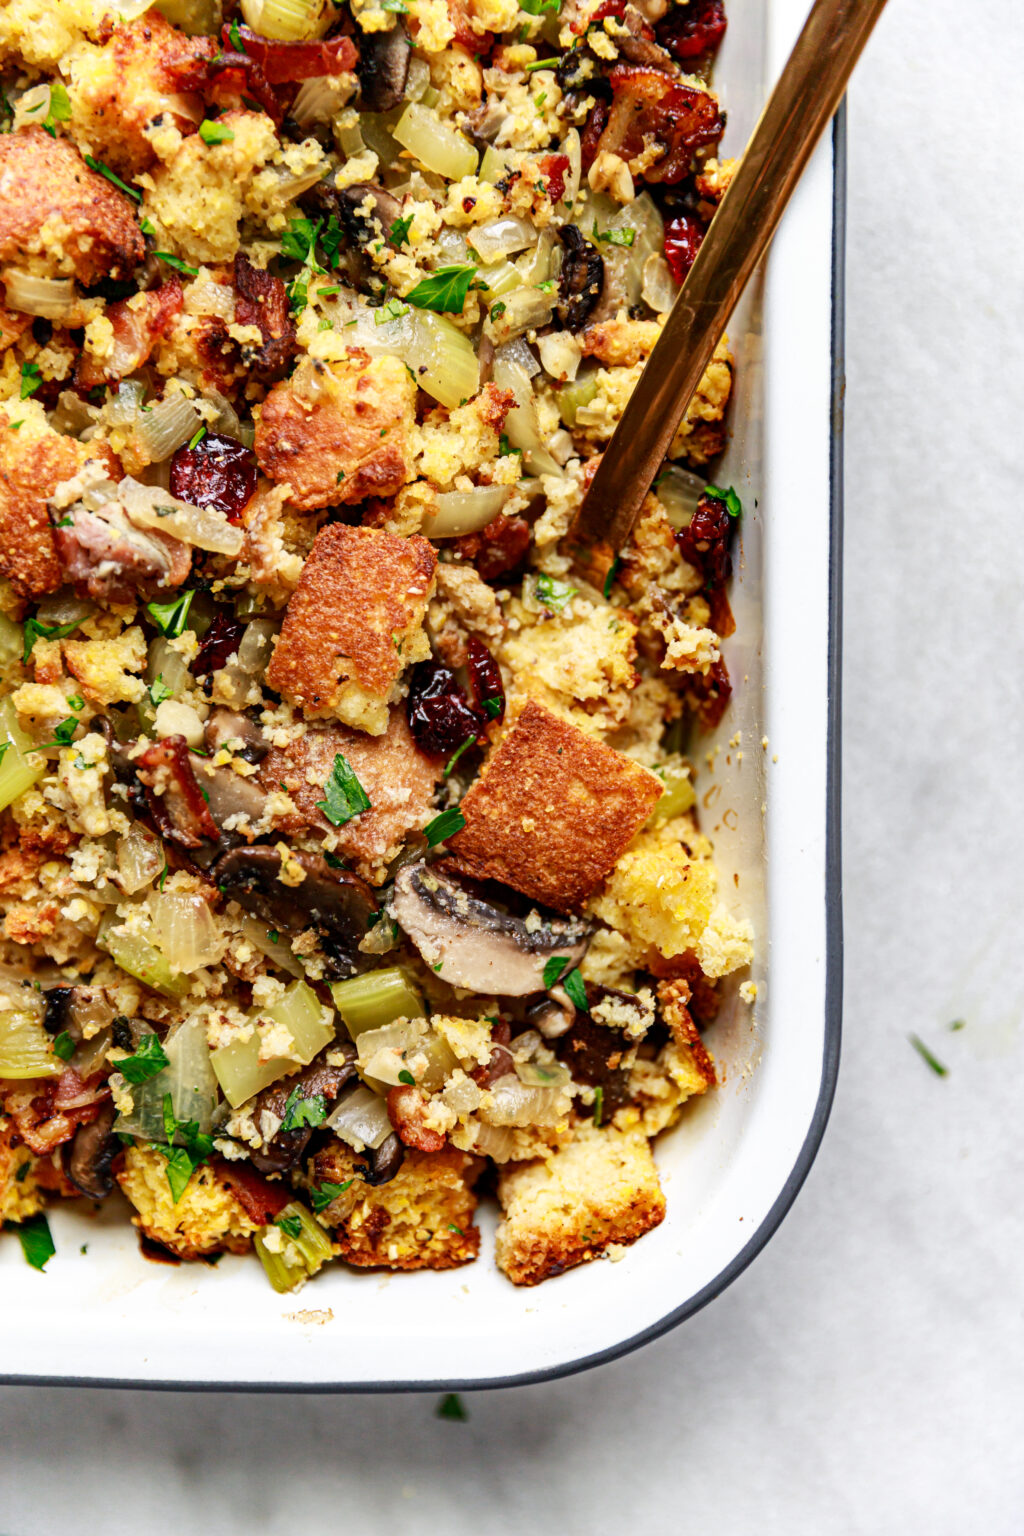 The Best Gluten Free Cornbread Stuffing - All the Healthy Things